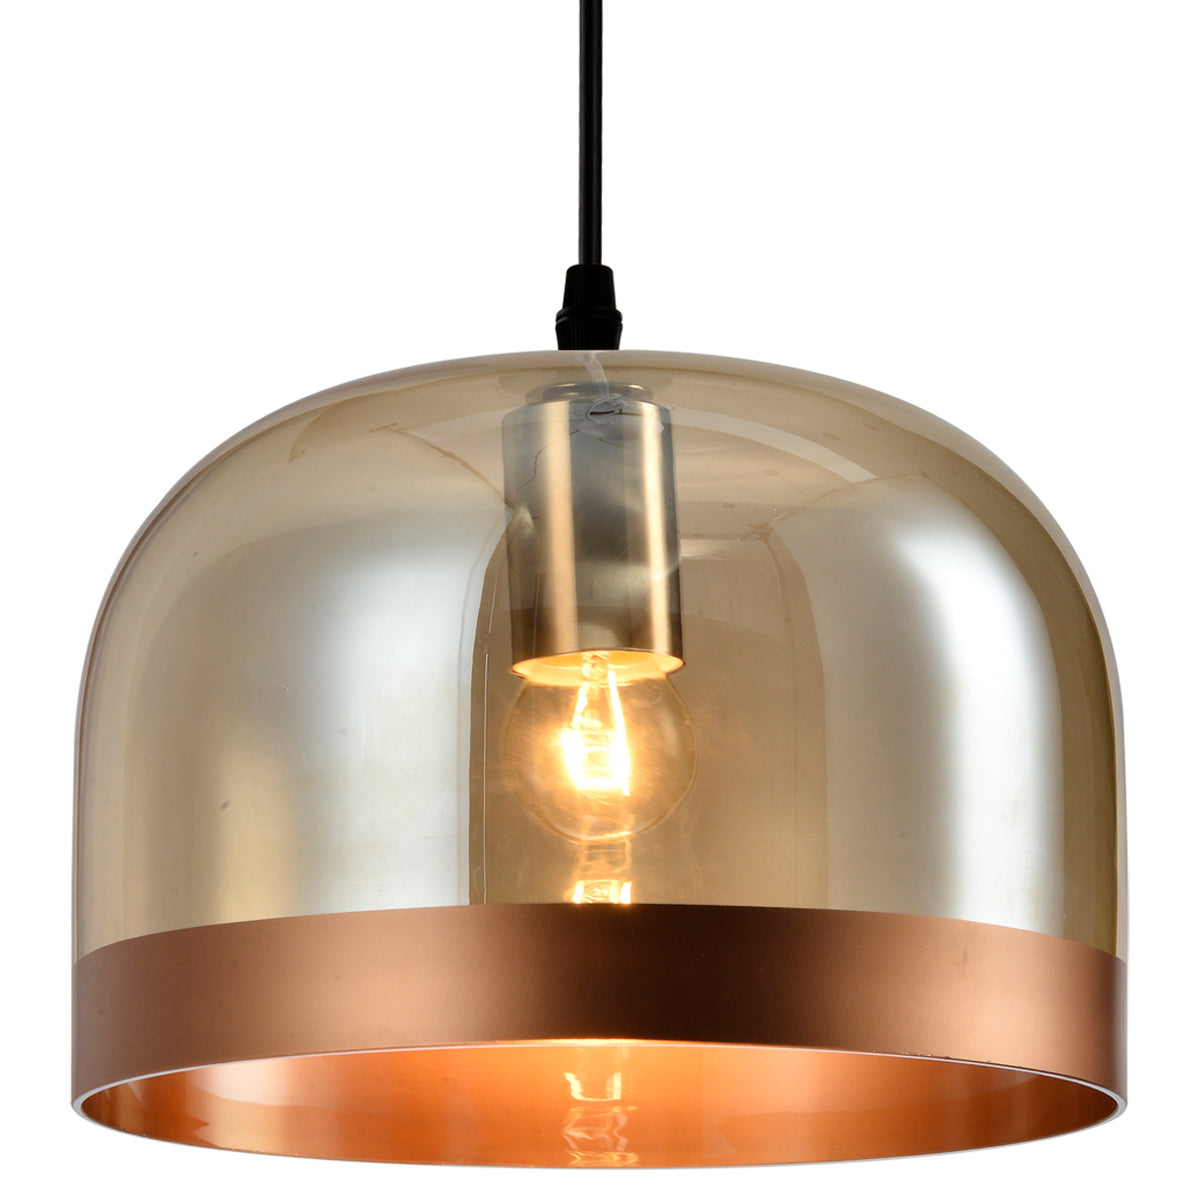 Our Hazel adjustable glass dome ceiling pendant light is the perfect addition to any room to add a minimal yet stunning focal point. The smoked champagne tinted glass brings a dark and elegant aesthetic to your interior as the dome shape creates a modern and contemporary appearance. The light within diffuses through the shade and illuminates your room with soft, deep mood light. Would look perfect in kitchens, livingroom, bedrooms also comes in a grey smoked effect glass. 